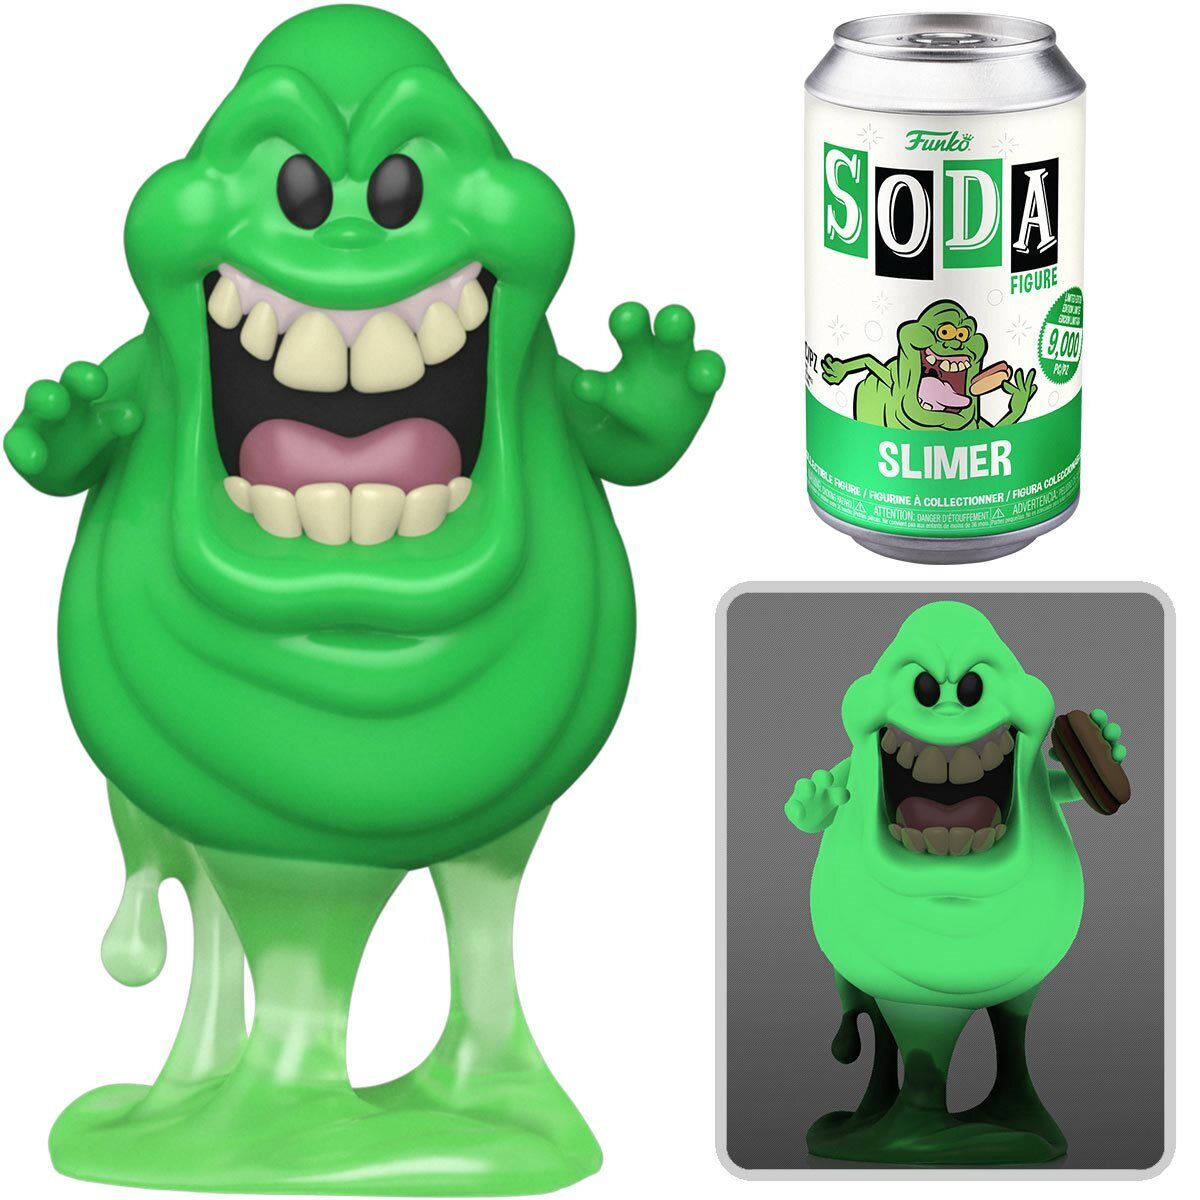 IN STOCK: Vinyl SODA: Ghostbusters- Slimer (1:6 Chance at Chase)